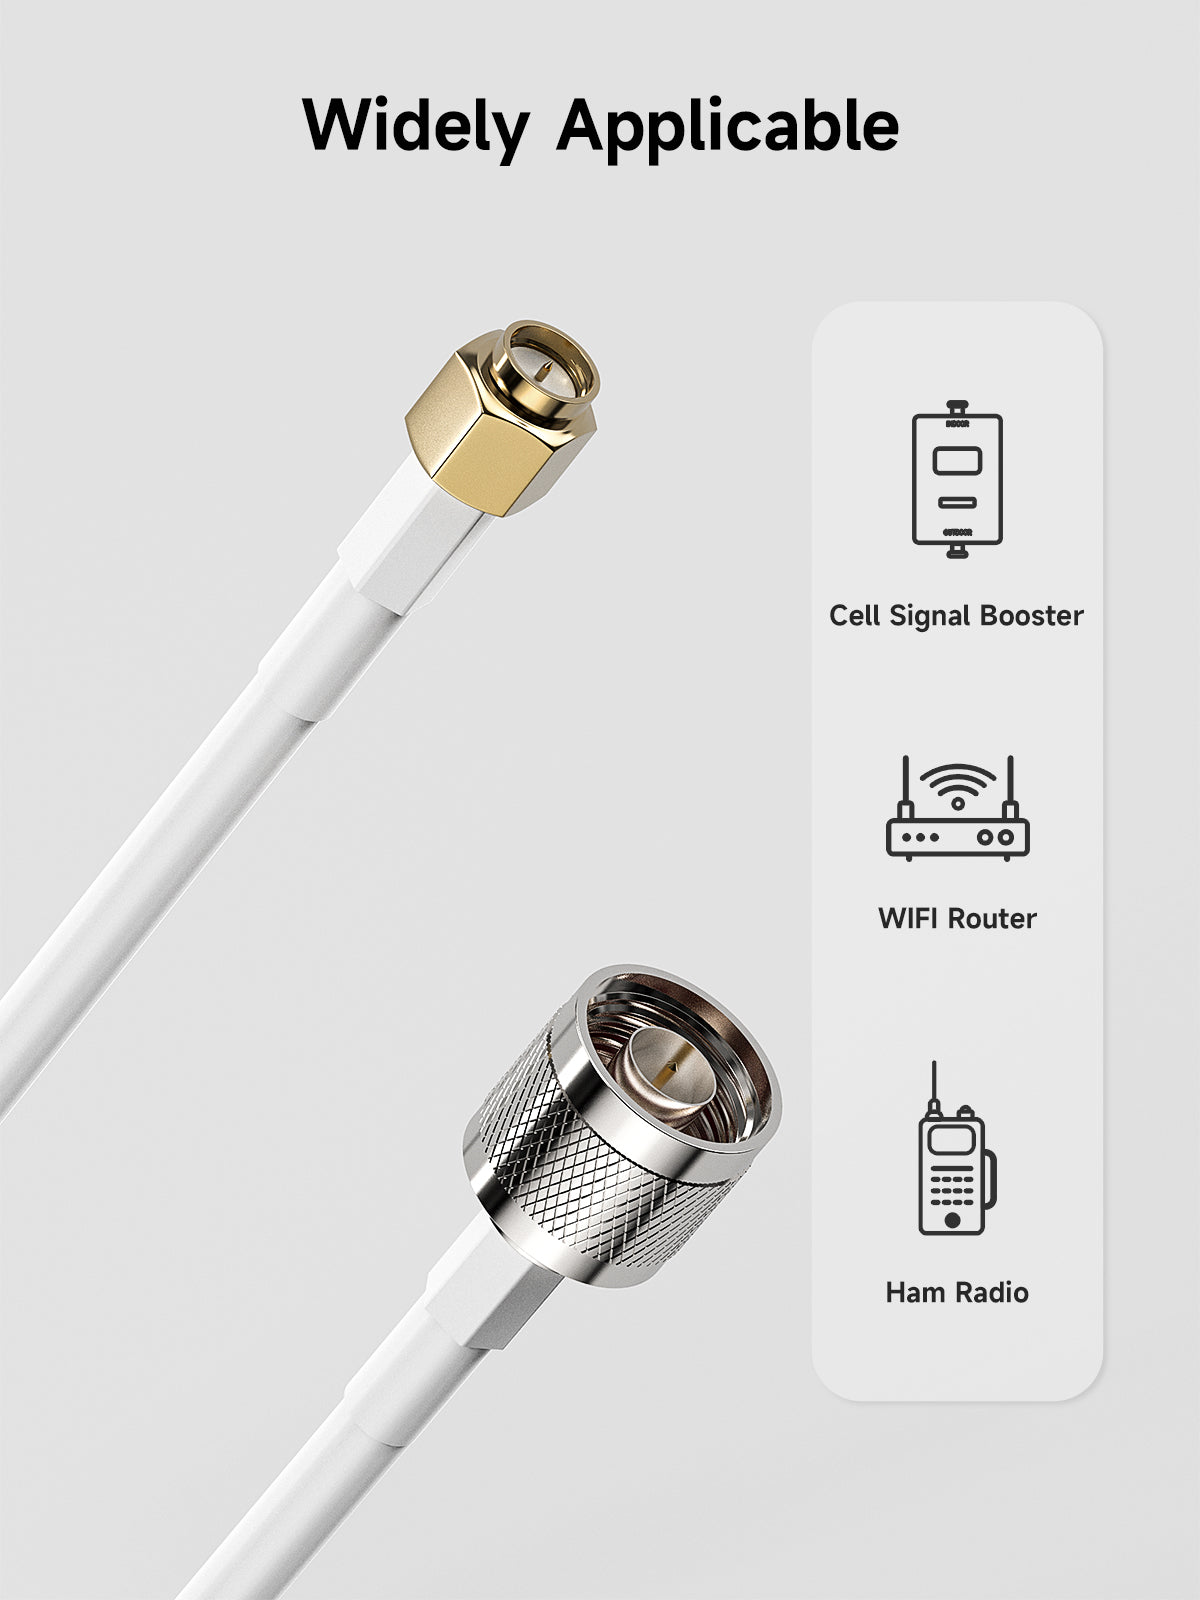 Coaxial Cable RG58 SMA Male to N Male 5m(16.4ft) Low Loss Weatherproof Extension Cable for Cell Phone Signal Booster WiFi Router 2G 3G 4G LTE Antenna